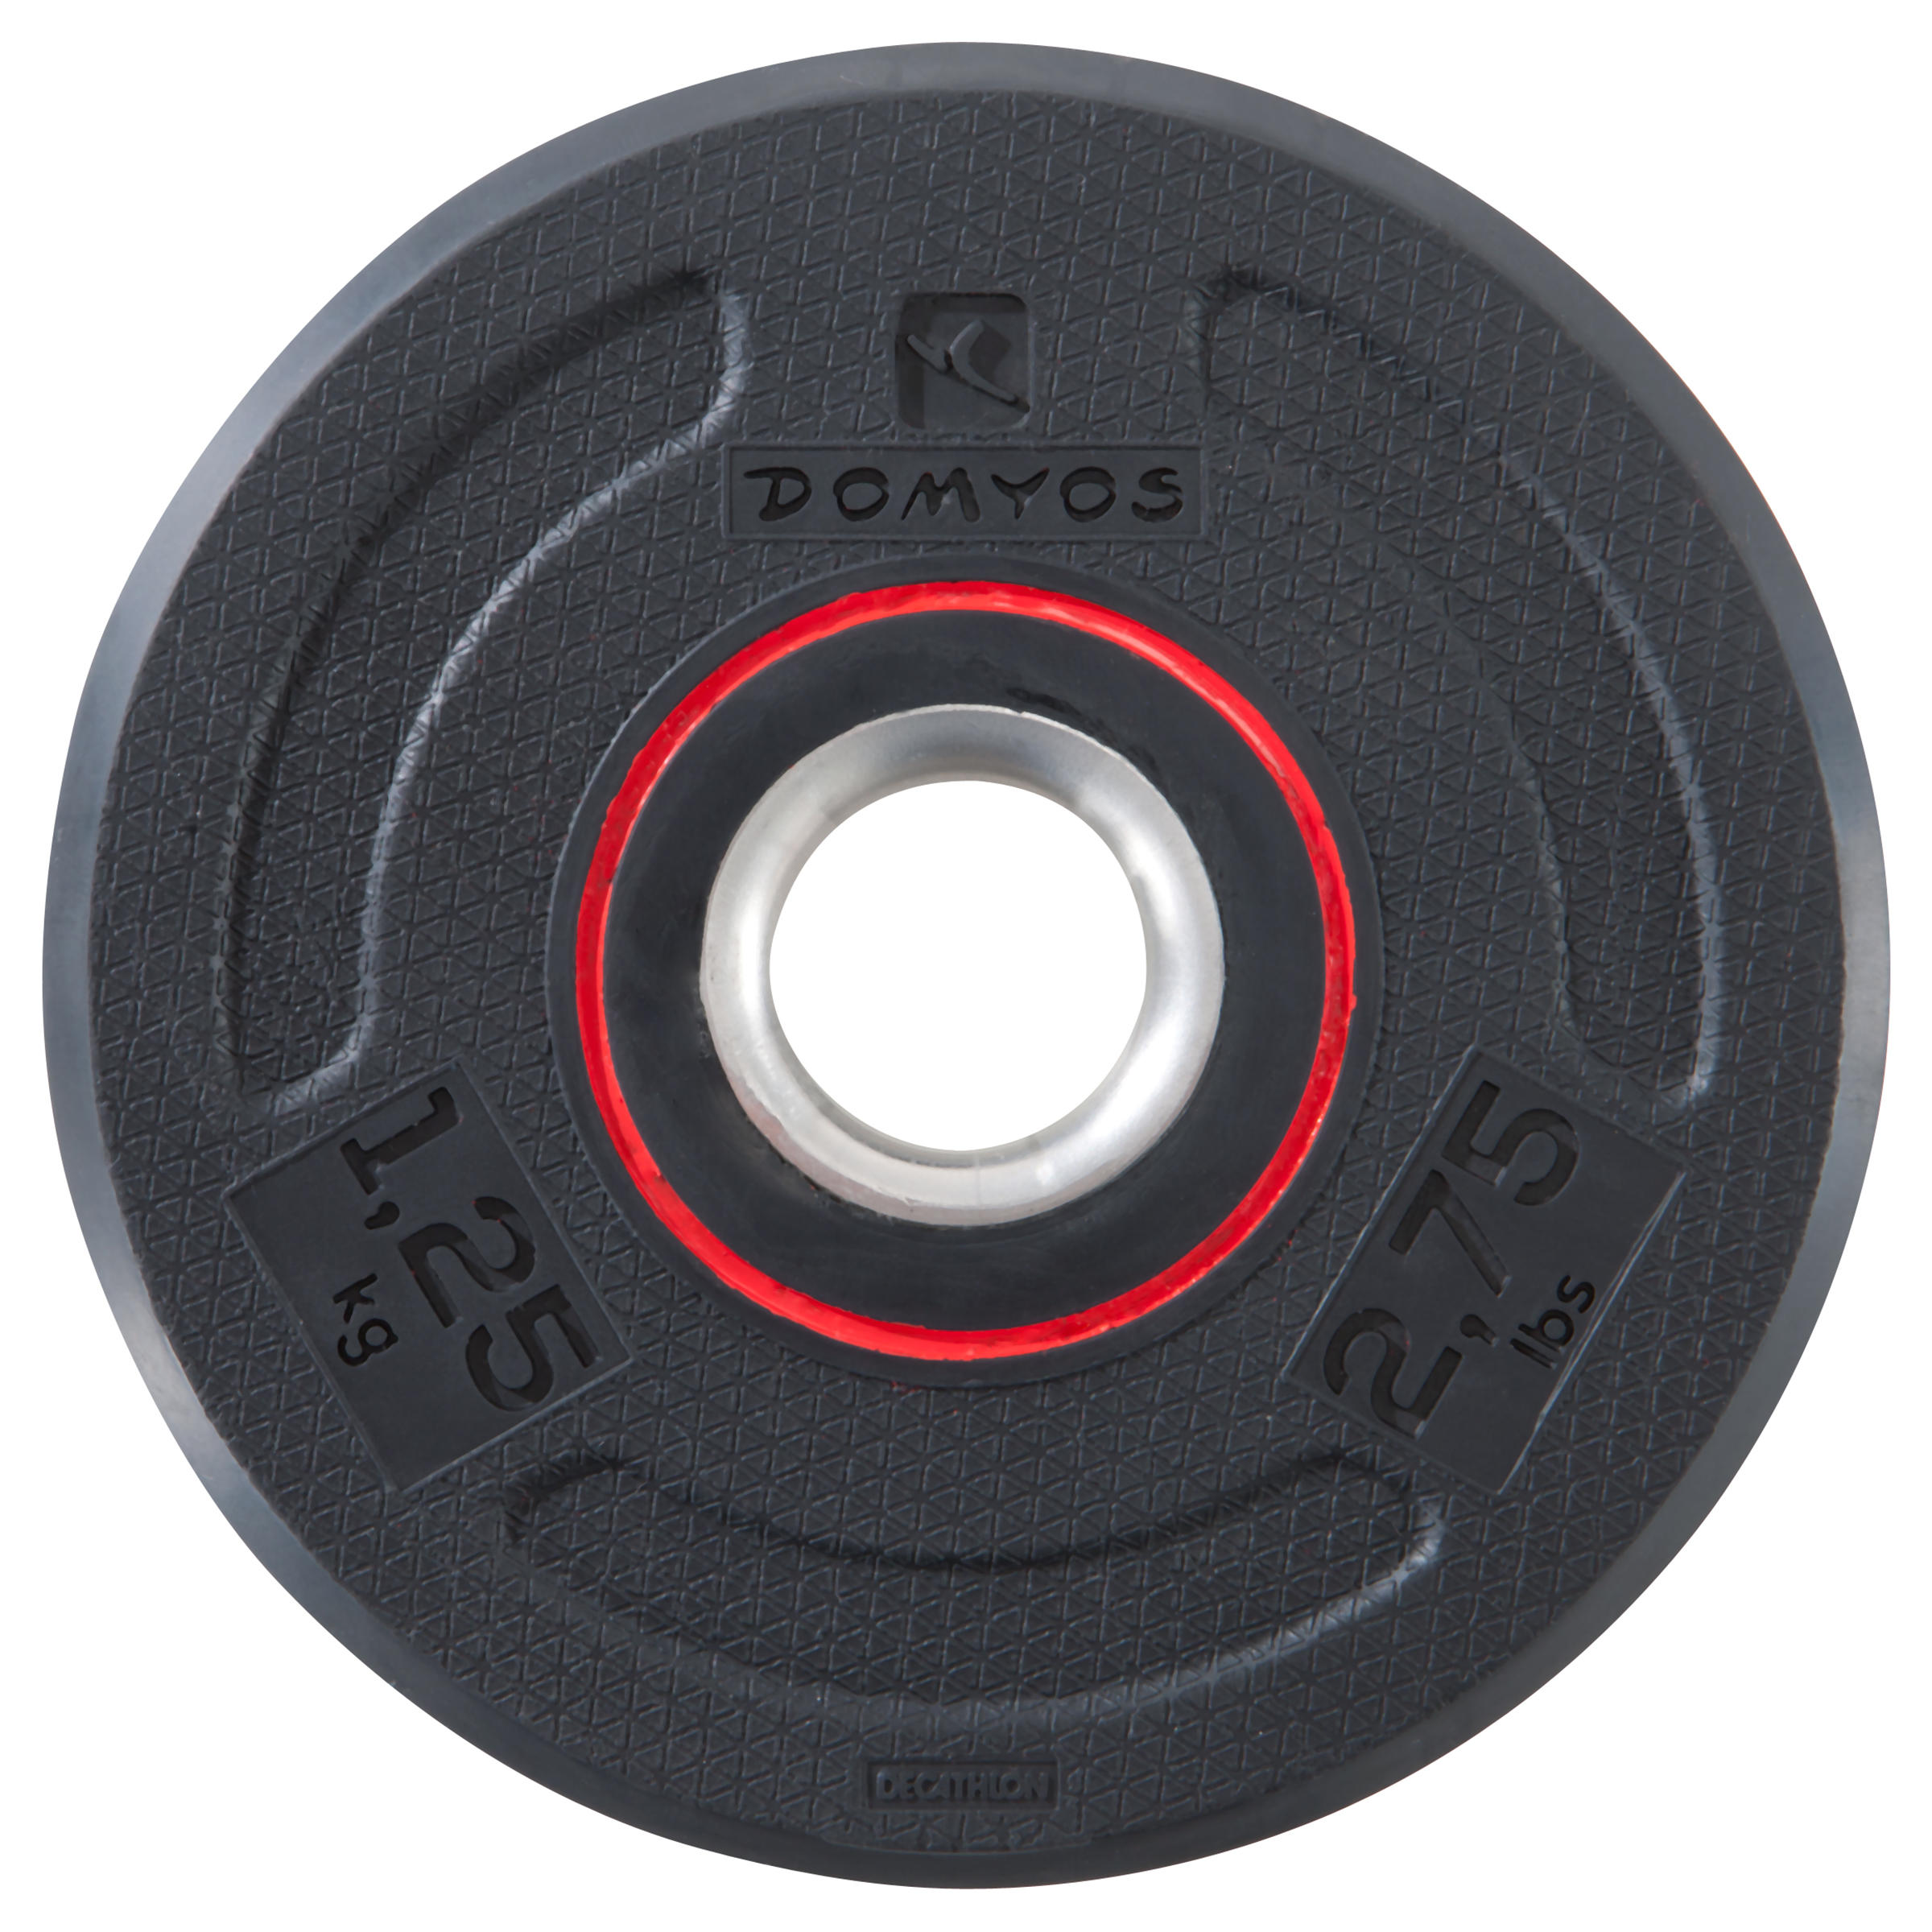 Image of 1.25 kg (2.75 lb) Rubber Weight Plate